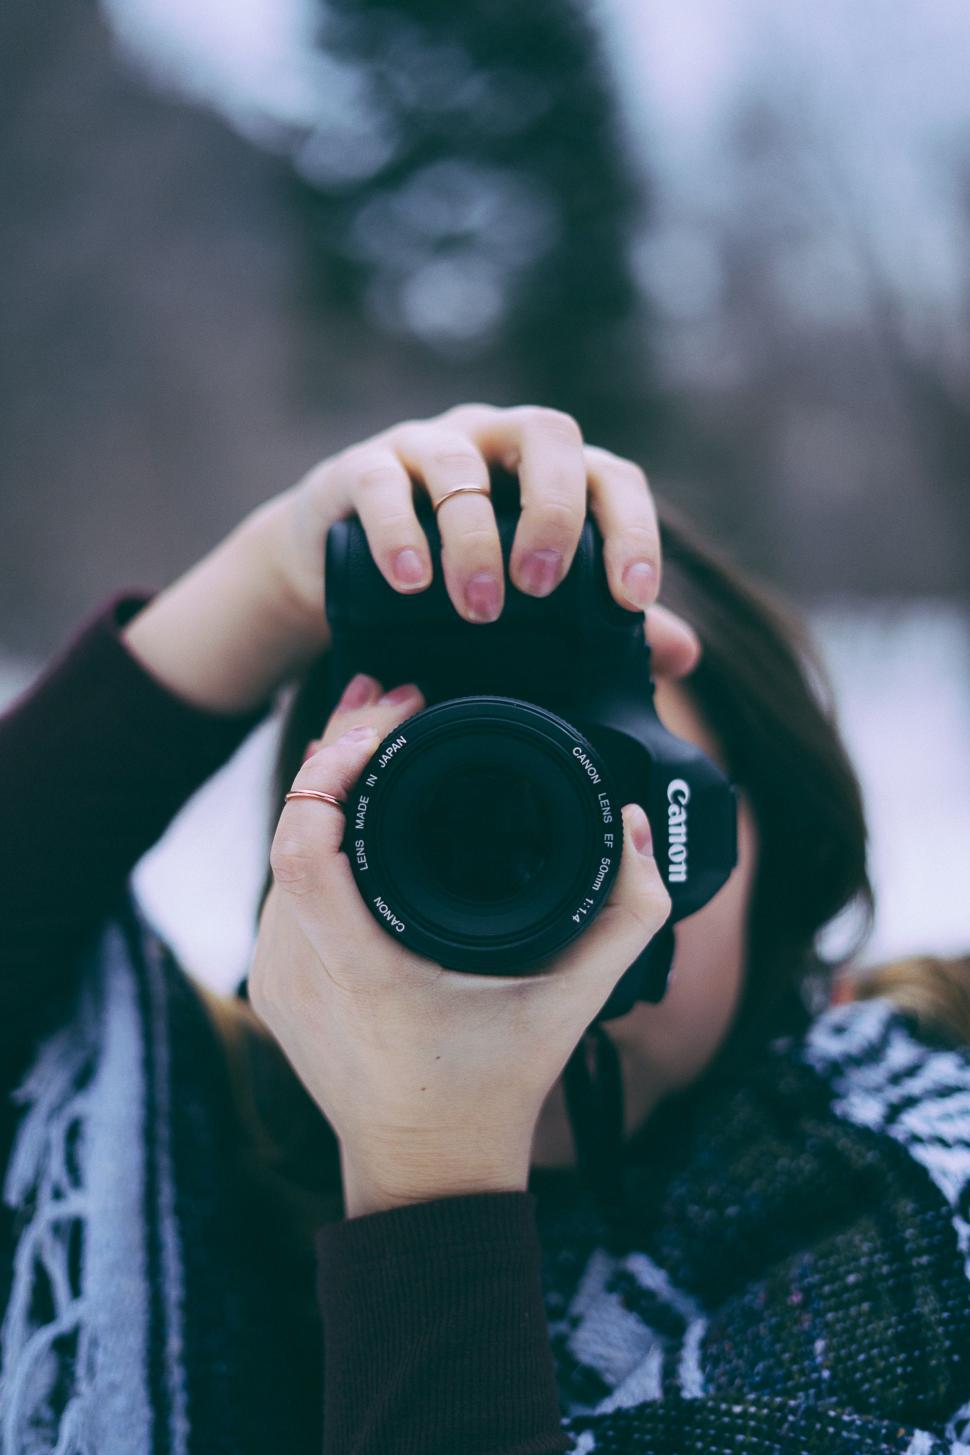 Free Image of Woman Taking a Picture With a Camera 